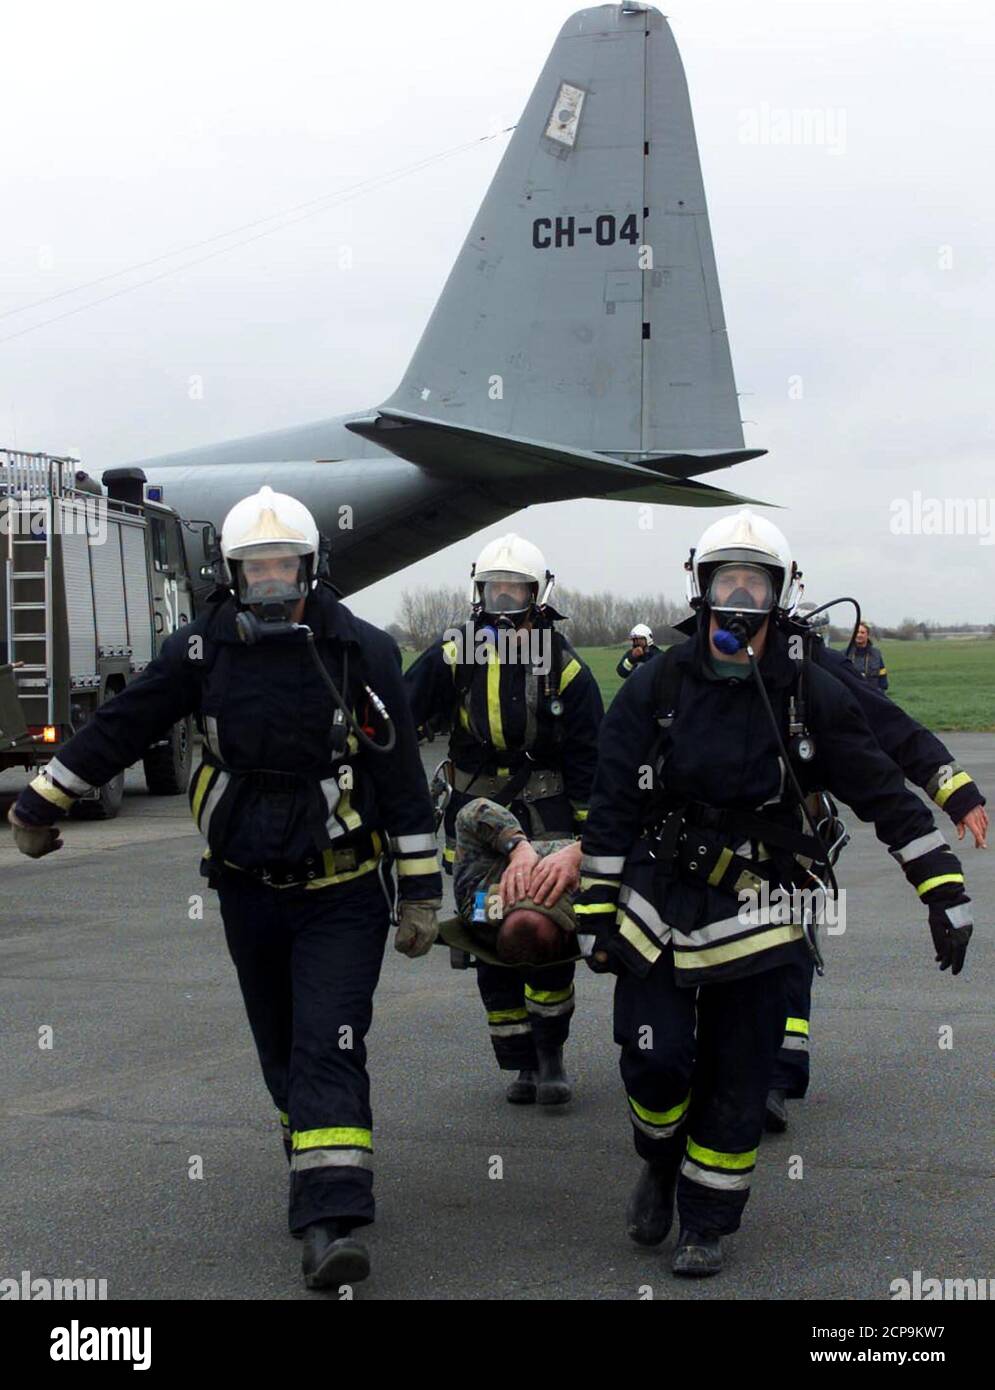 A volunteer playing the role of a victim is evacuated by firemen during the reconstruction of an emergency plan set up after an aeroplane crash in Koksijde, northern Belgium March 14. These exercises are frequently organised to prevent mistakes in the evacuation of victims.  HRM Stock Photo